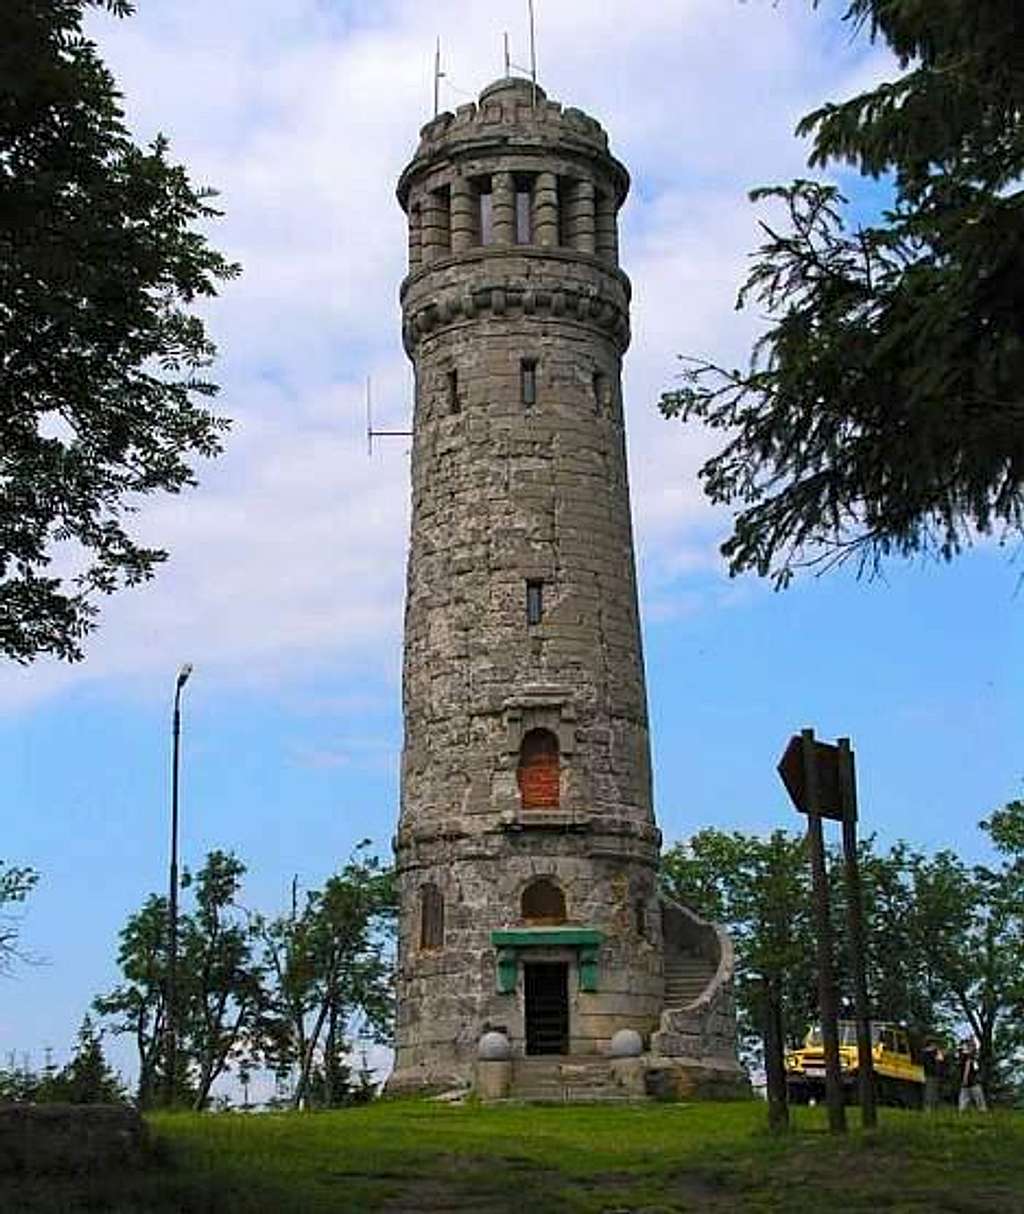 The tower in the state it was in 2005, before being restored